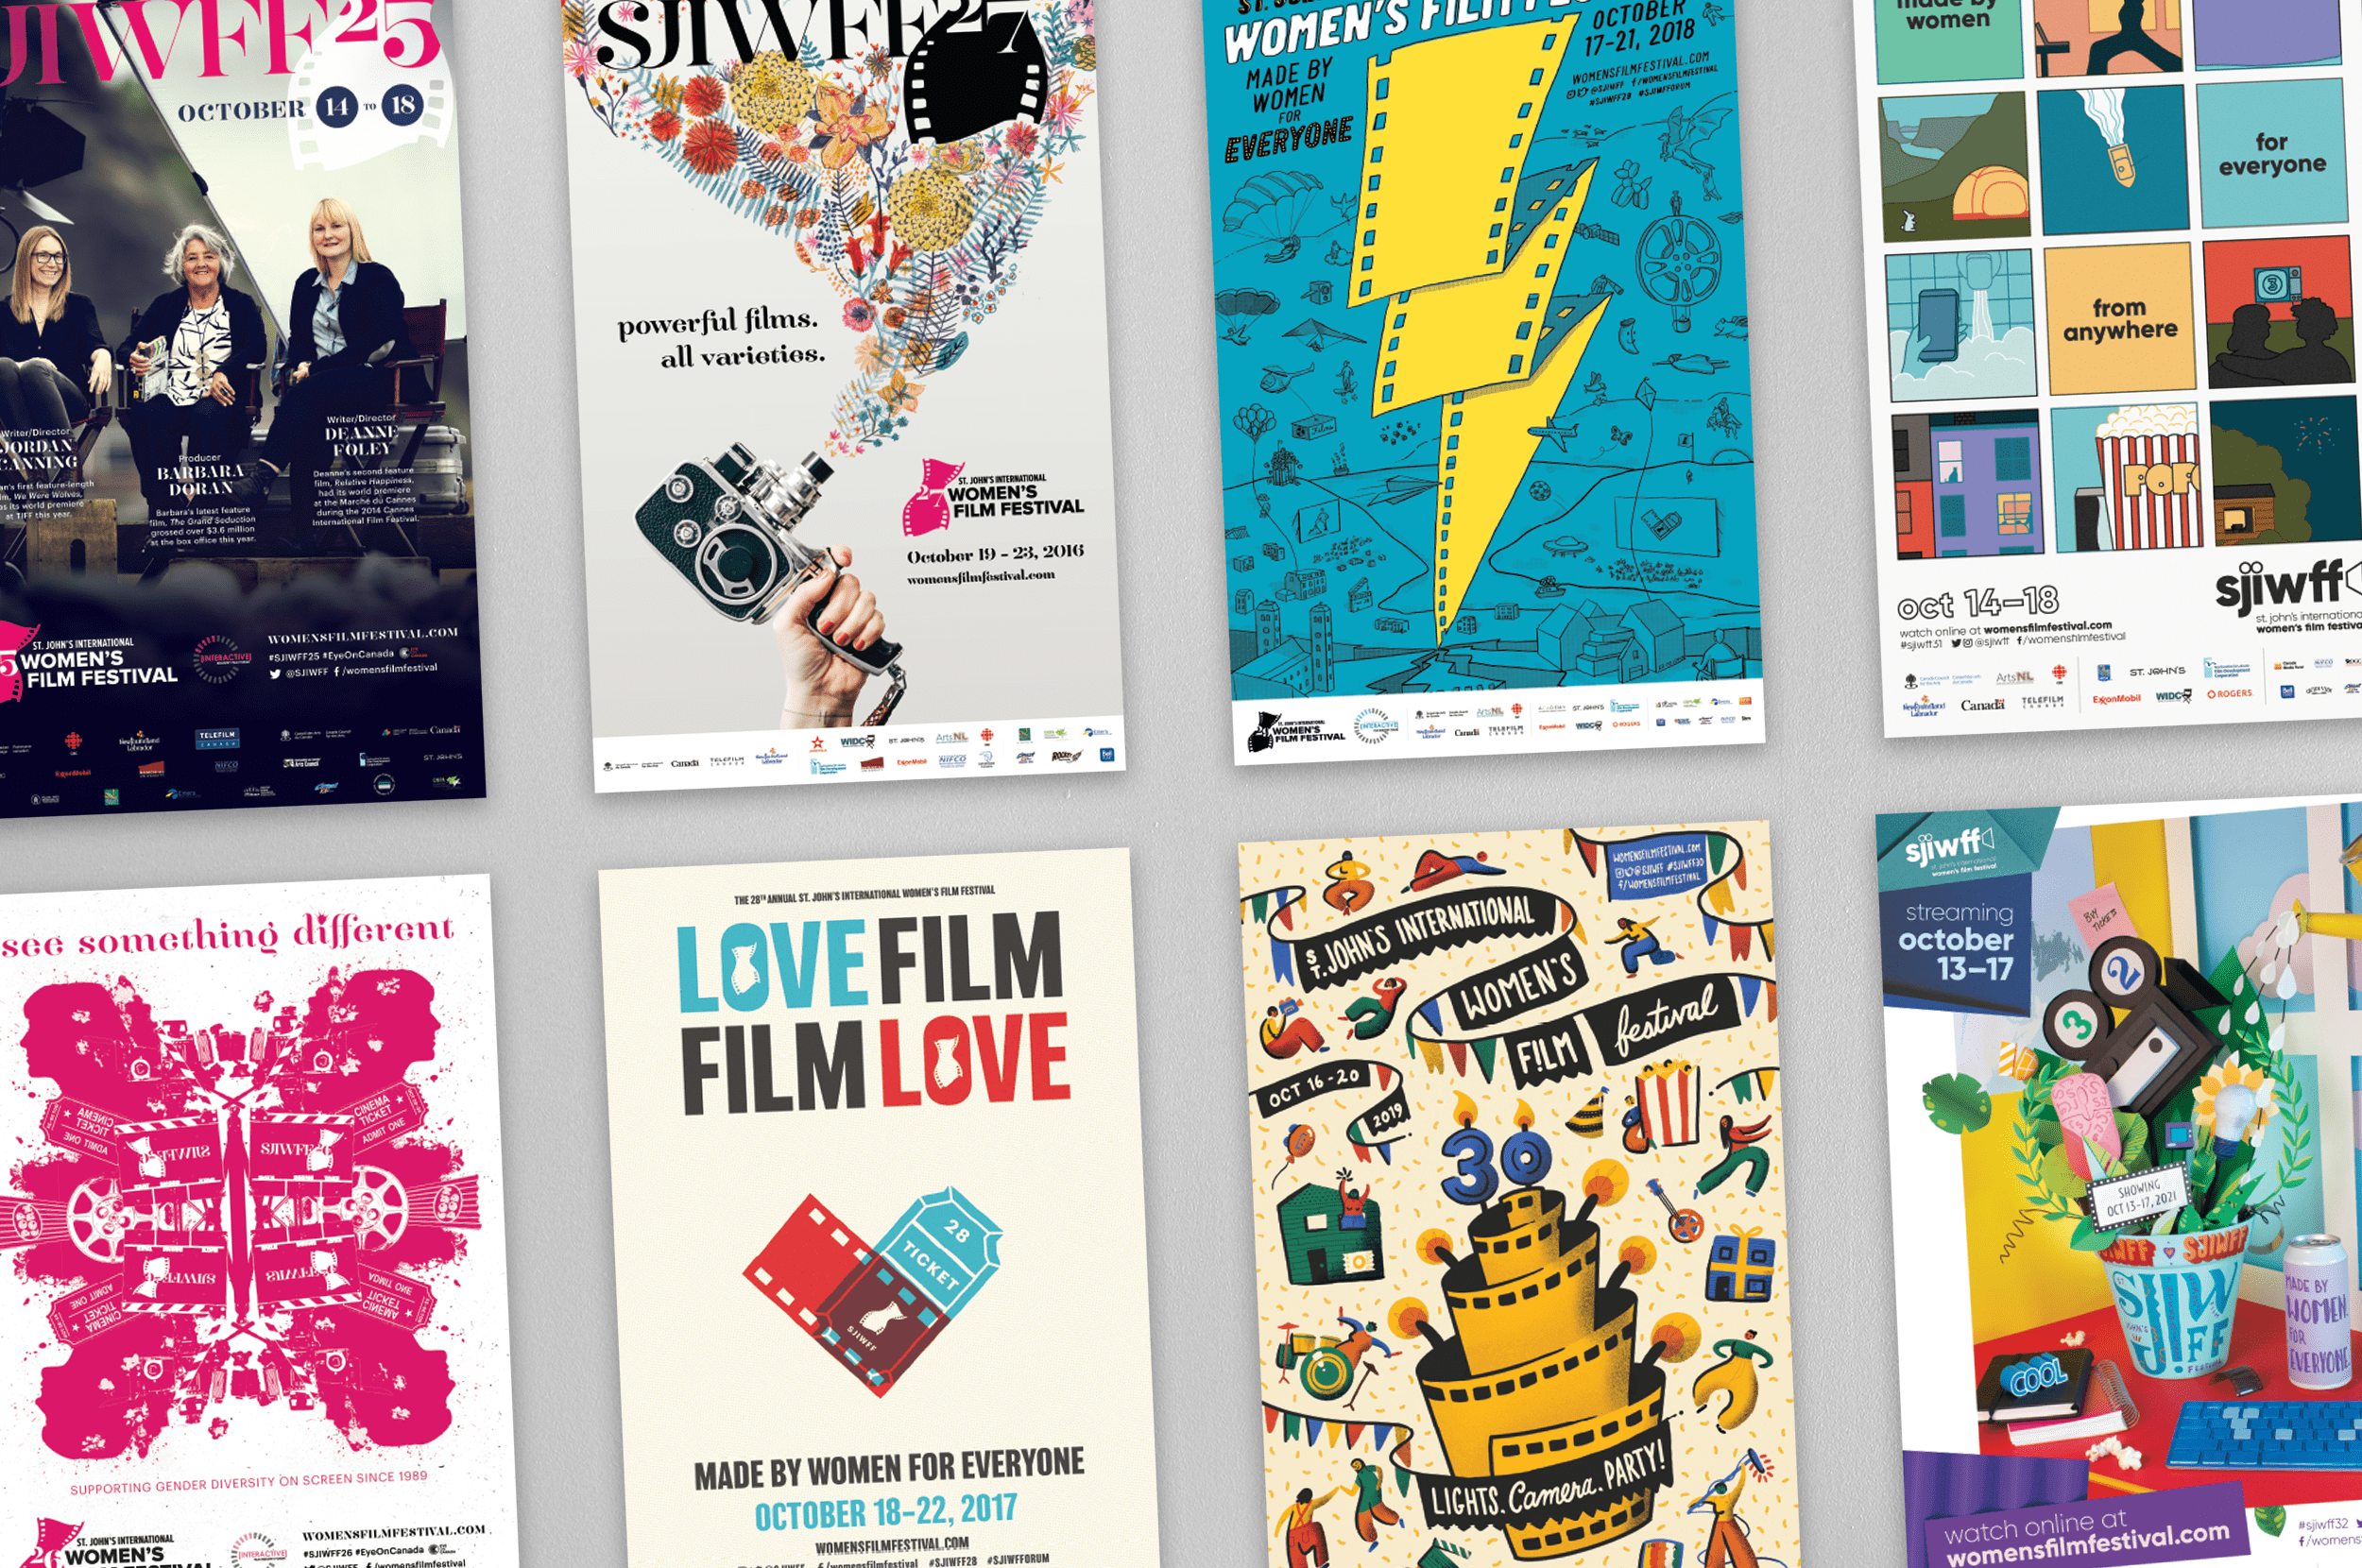 An overview of eight SJIWFF posters from 2014 to 2021